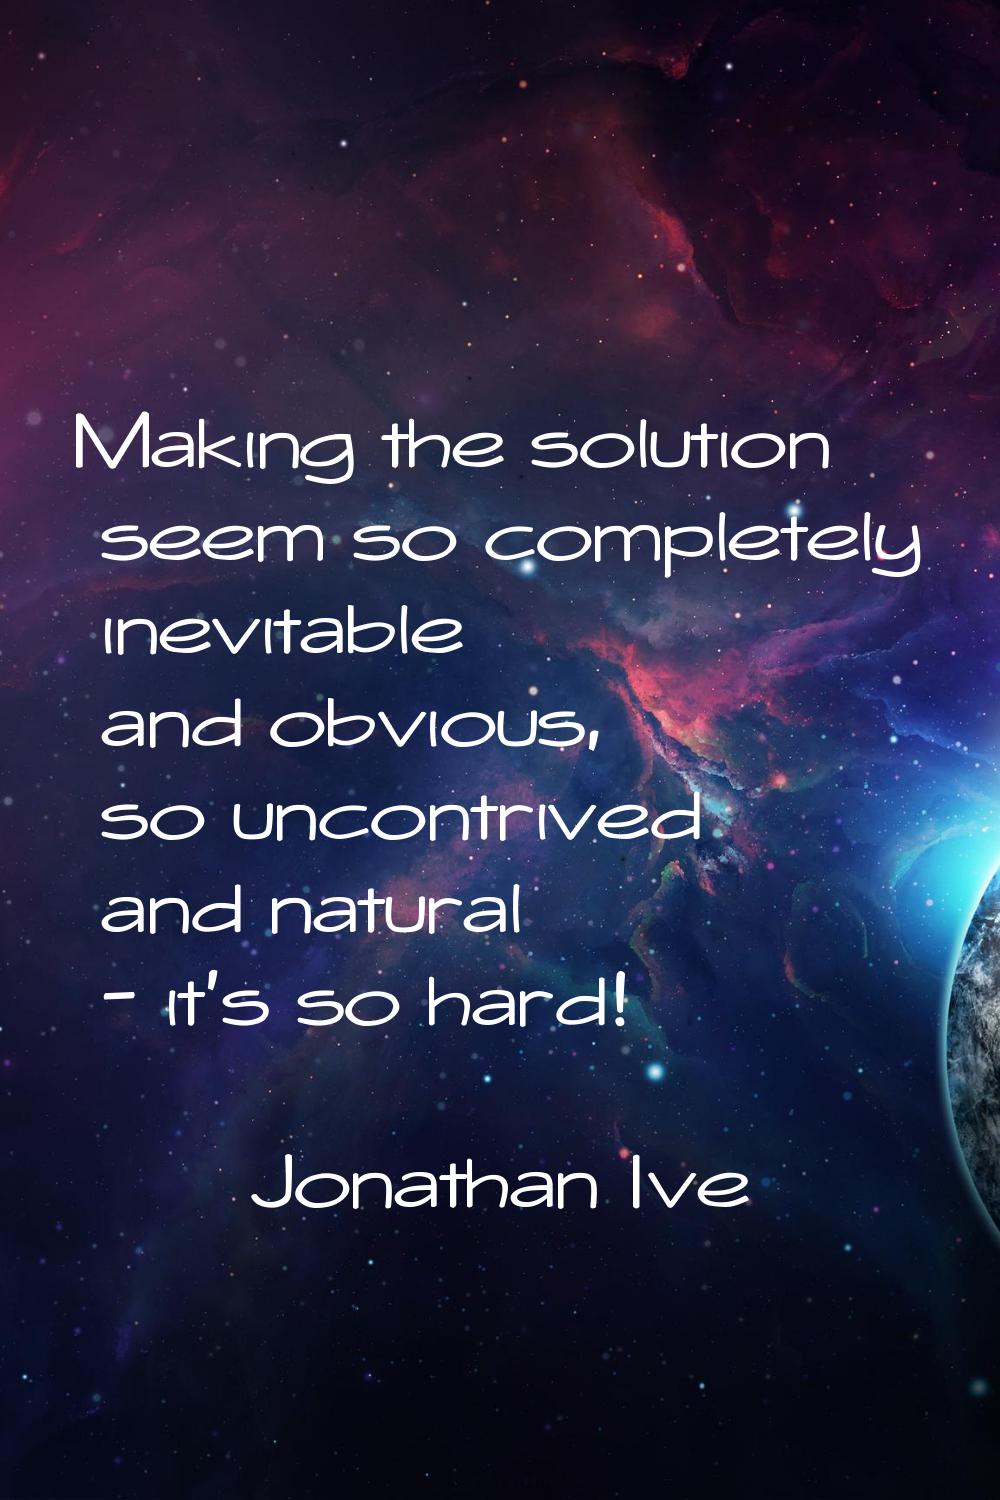 Making the solution seem so completely inevitable and obvious, so uncontrived and natural - it's so